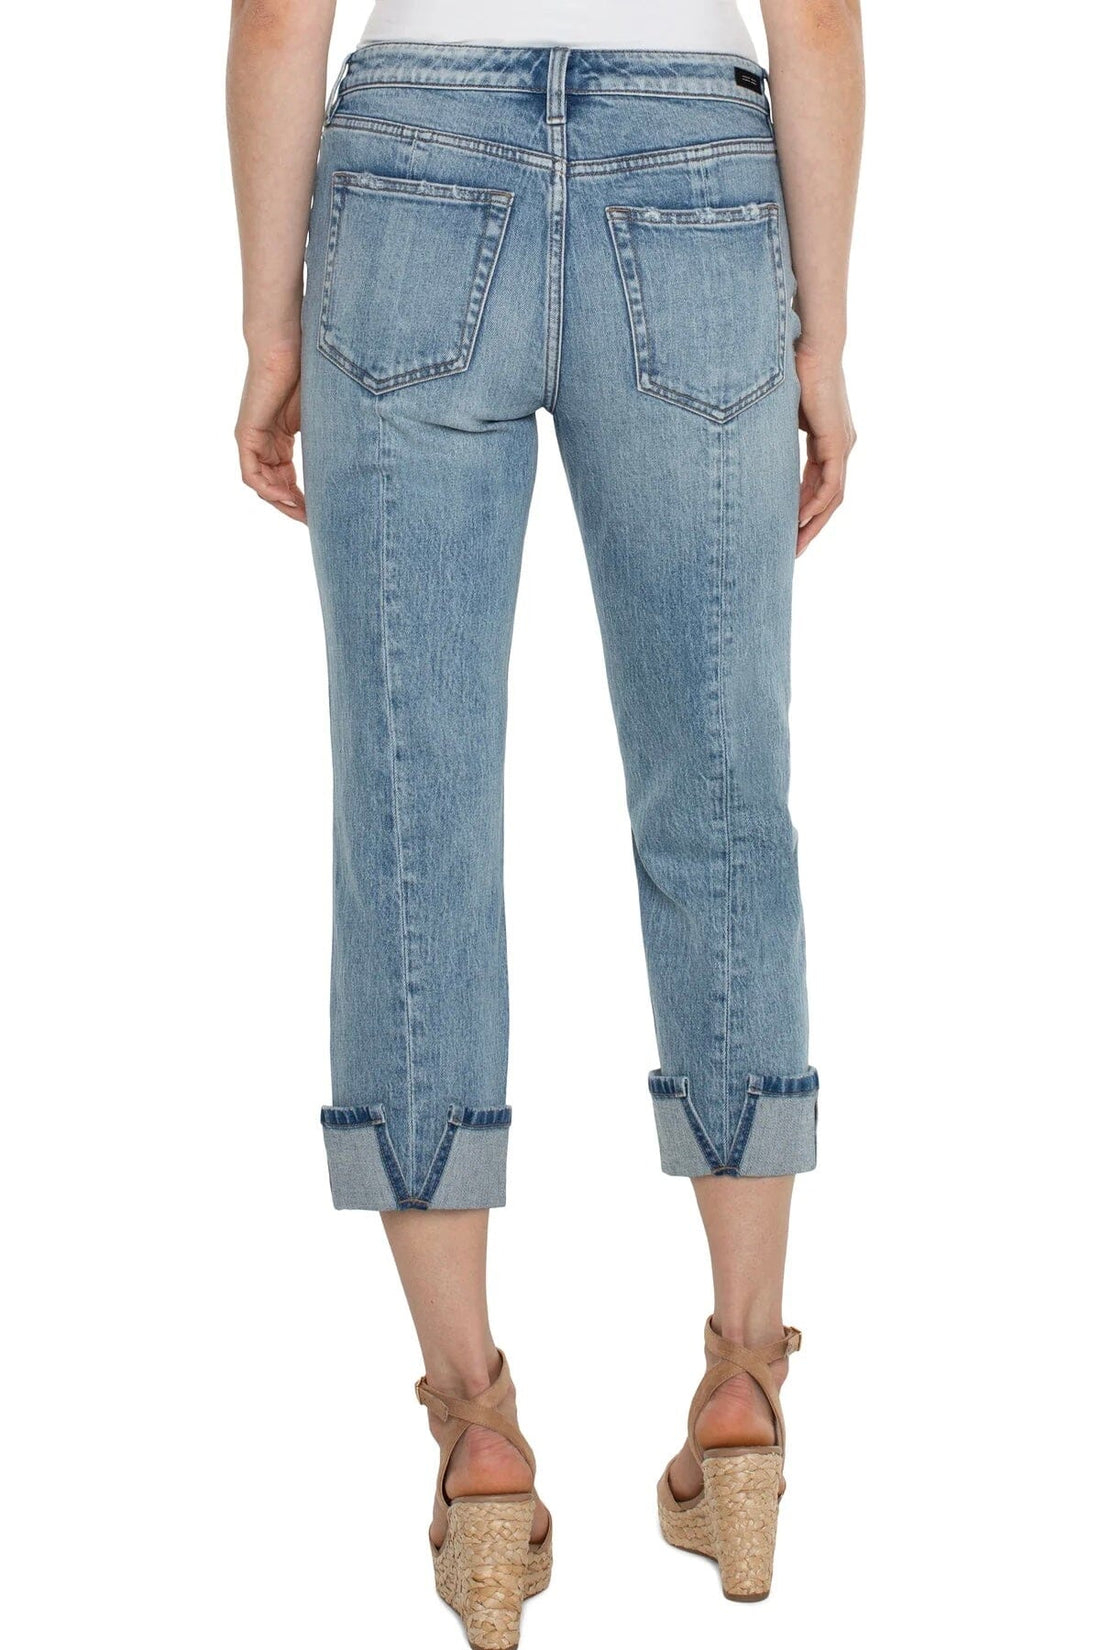 Marley Girlfriend Cuffed With Back Seam JEANS LIVERPOOL 